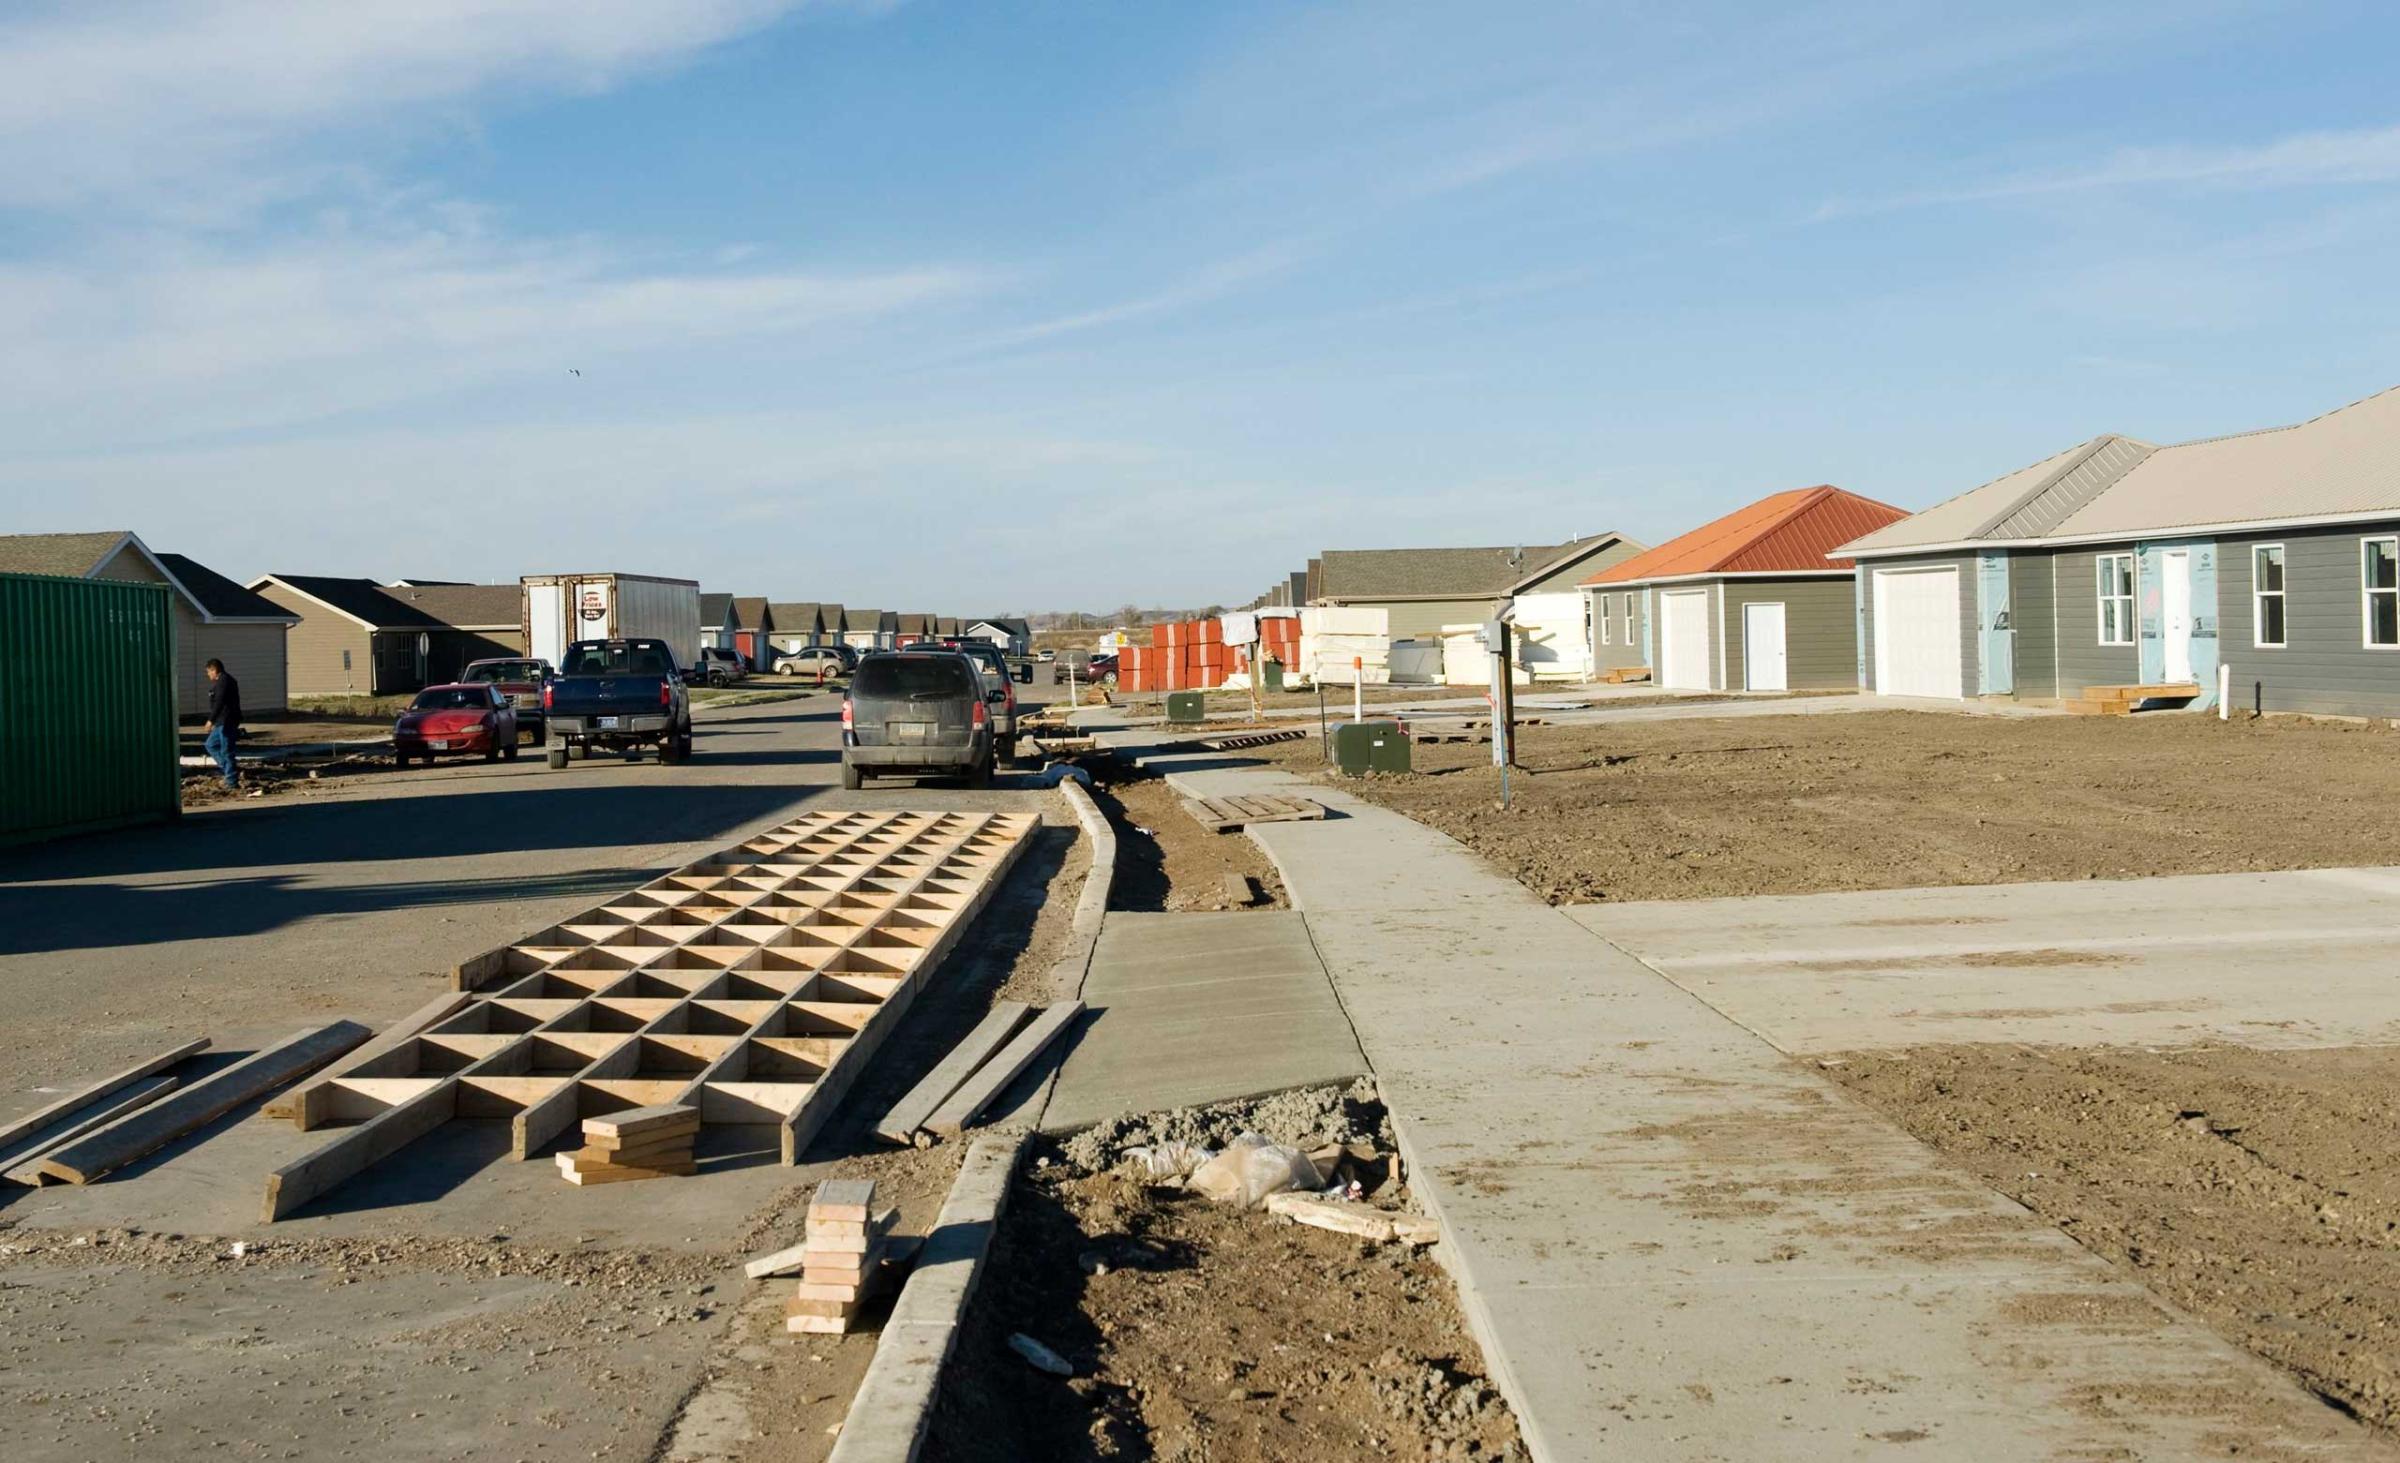 A housing development for members of the Three Affiliated Tribes under construction in New Town on the Fort Berthold Reservation in North Dakota